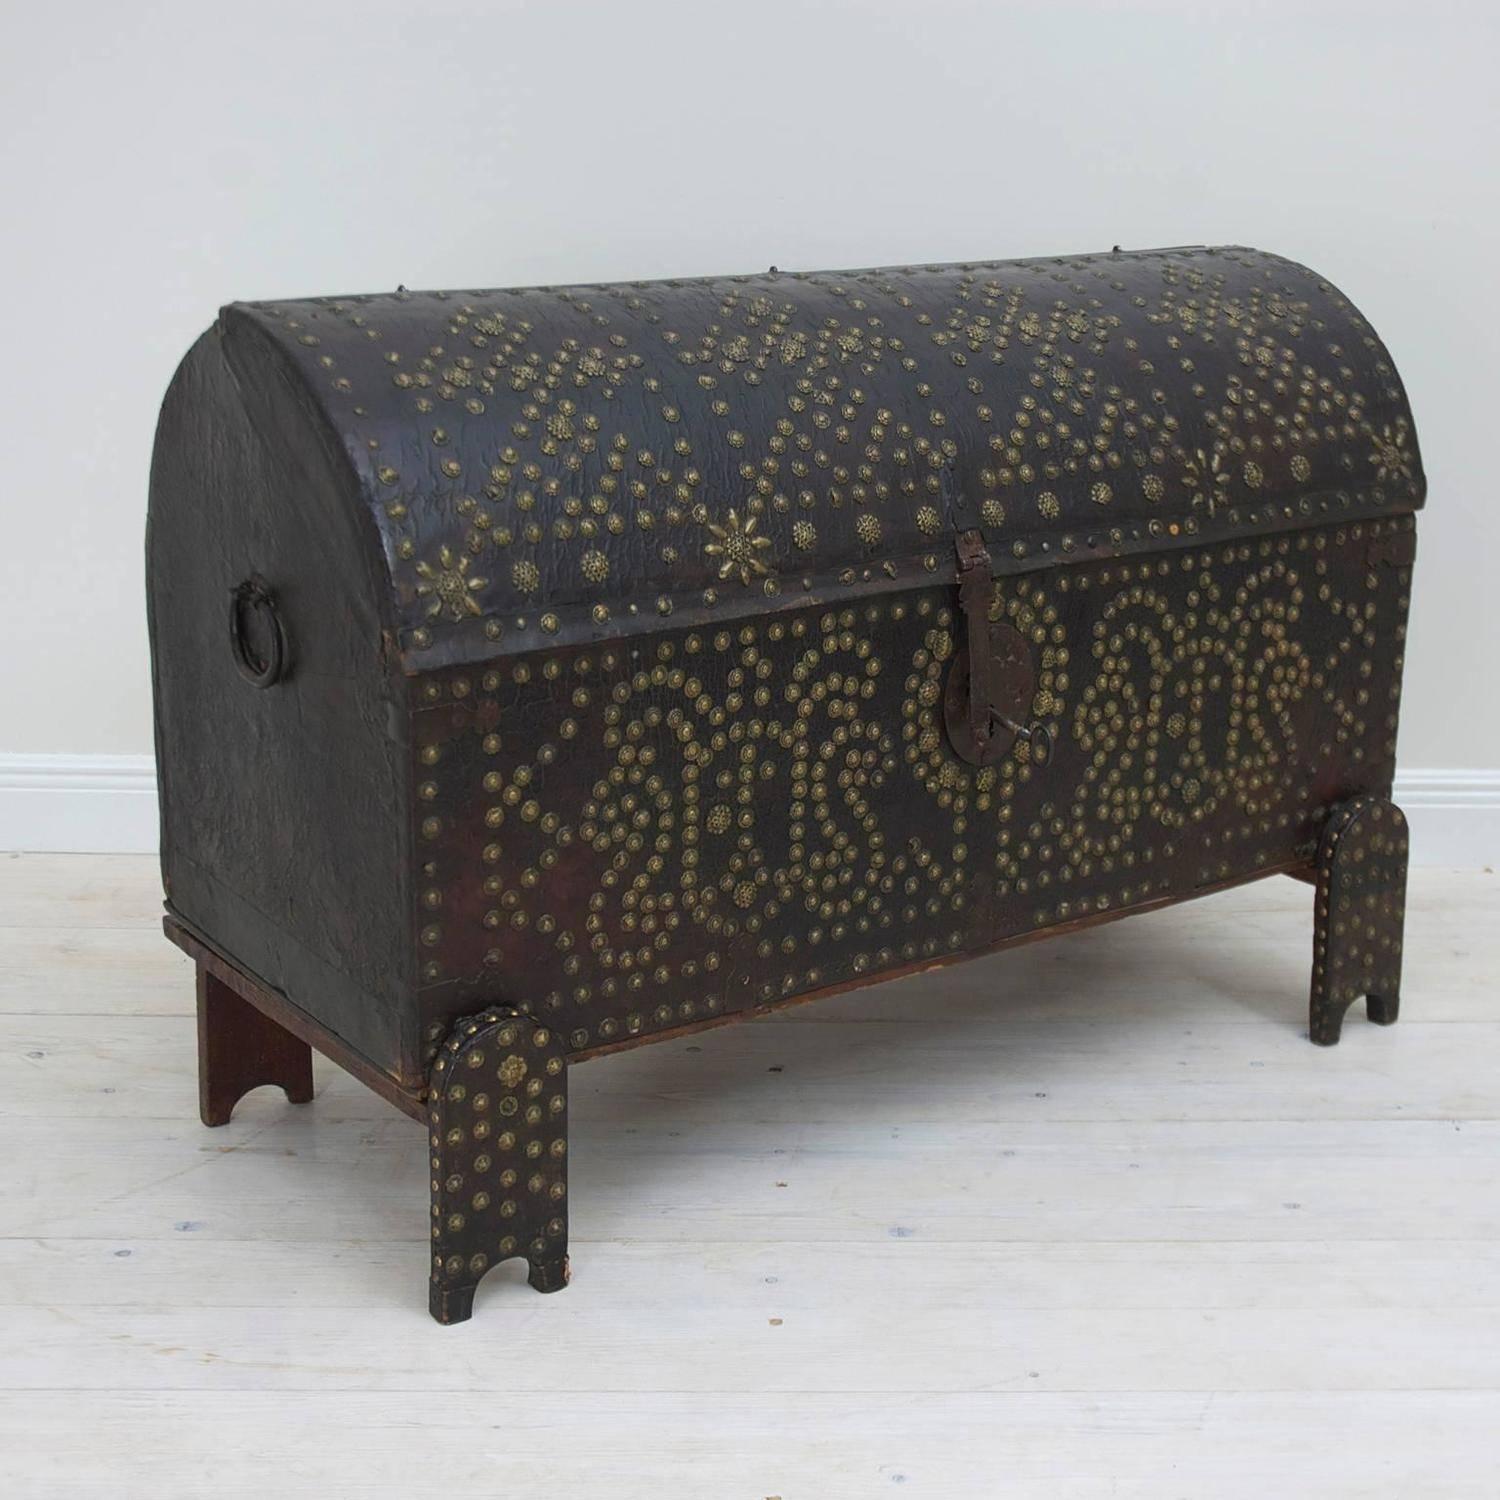 Baroque 18th Century Spanish Leather-Bound Chest on Stand with Decorative Nailheads